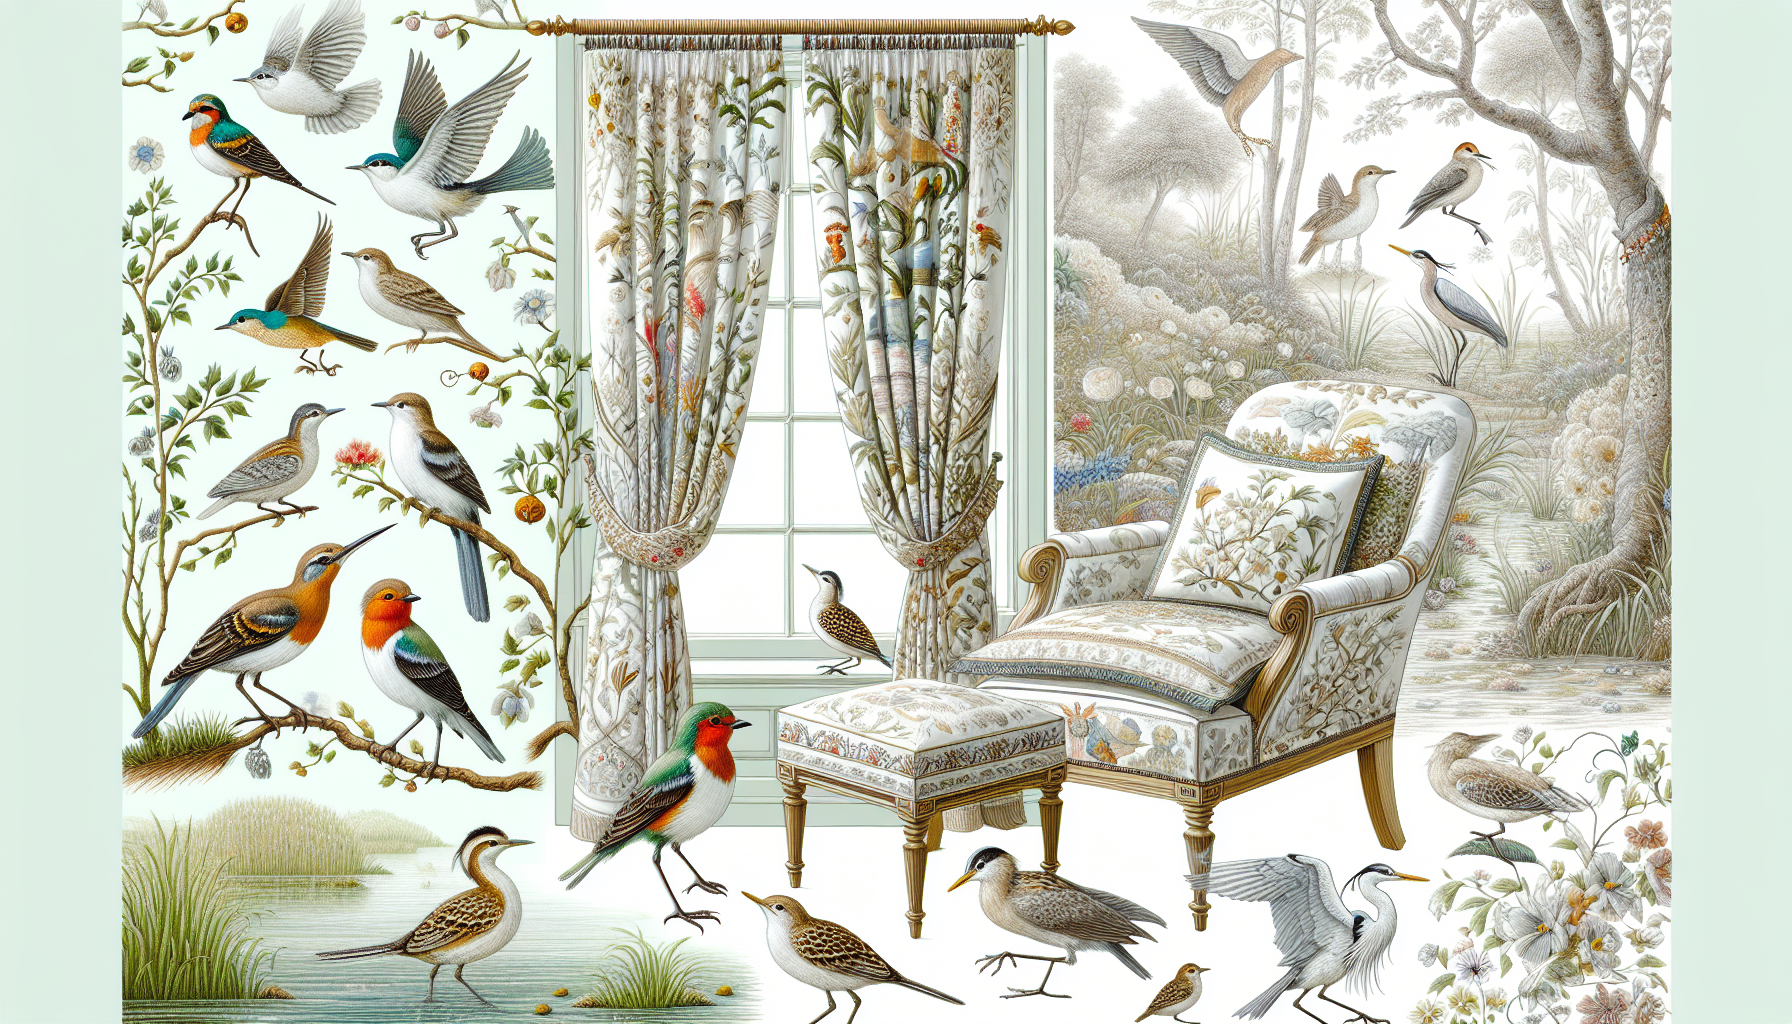 Textiles and fabrics with bird motifs including embroidered curtains and patterned bedding